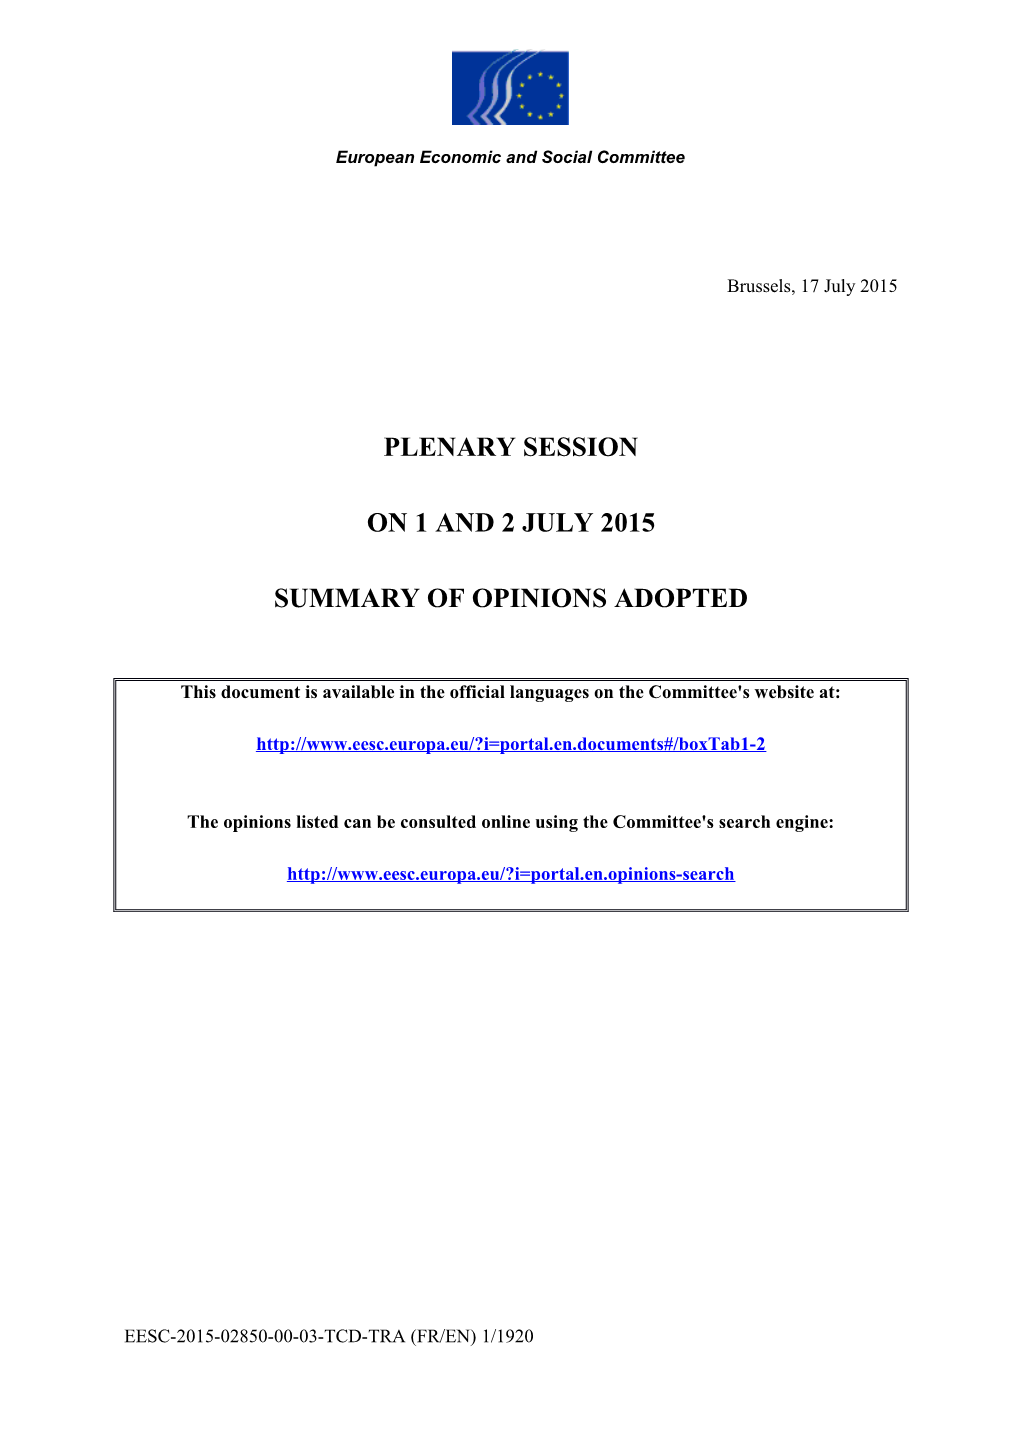 Summary of Opinions Adopted - 509Th Plenary Session of 1 & 2 July 2015